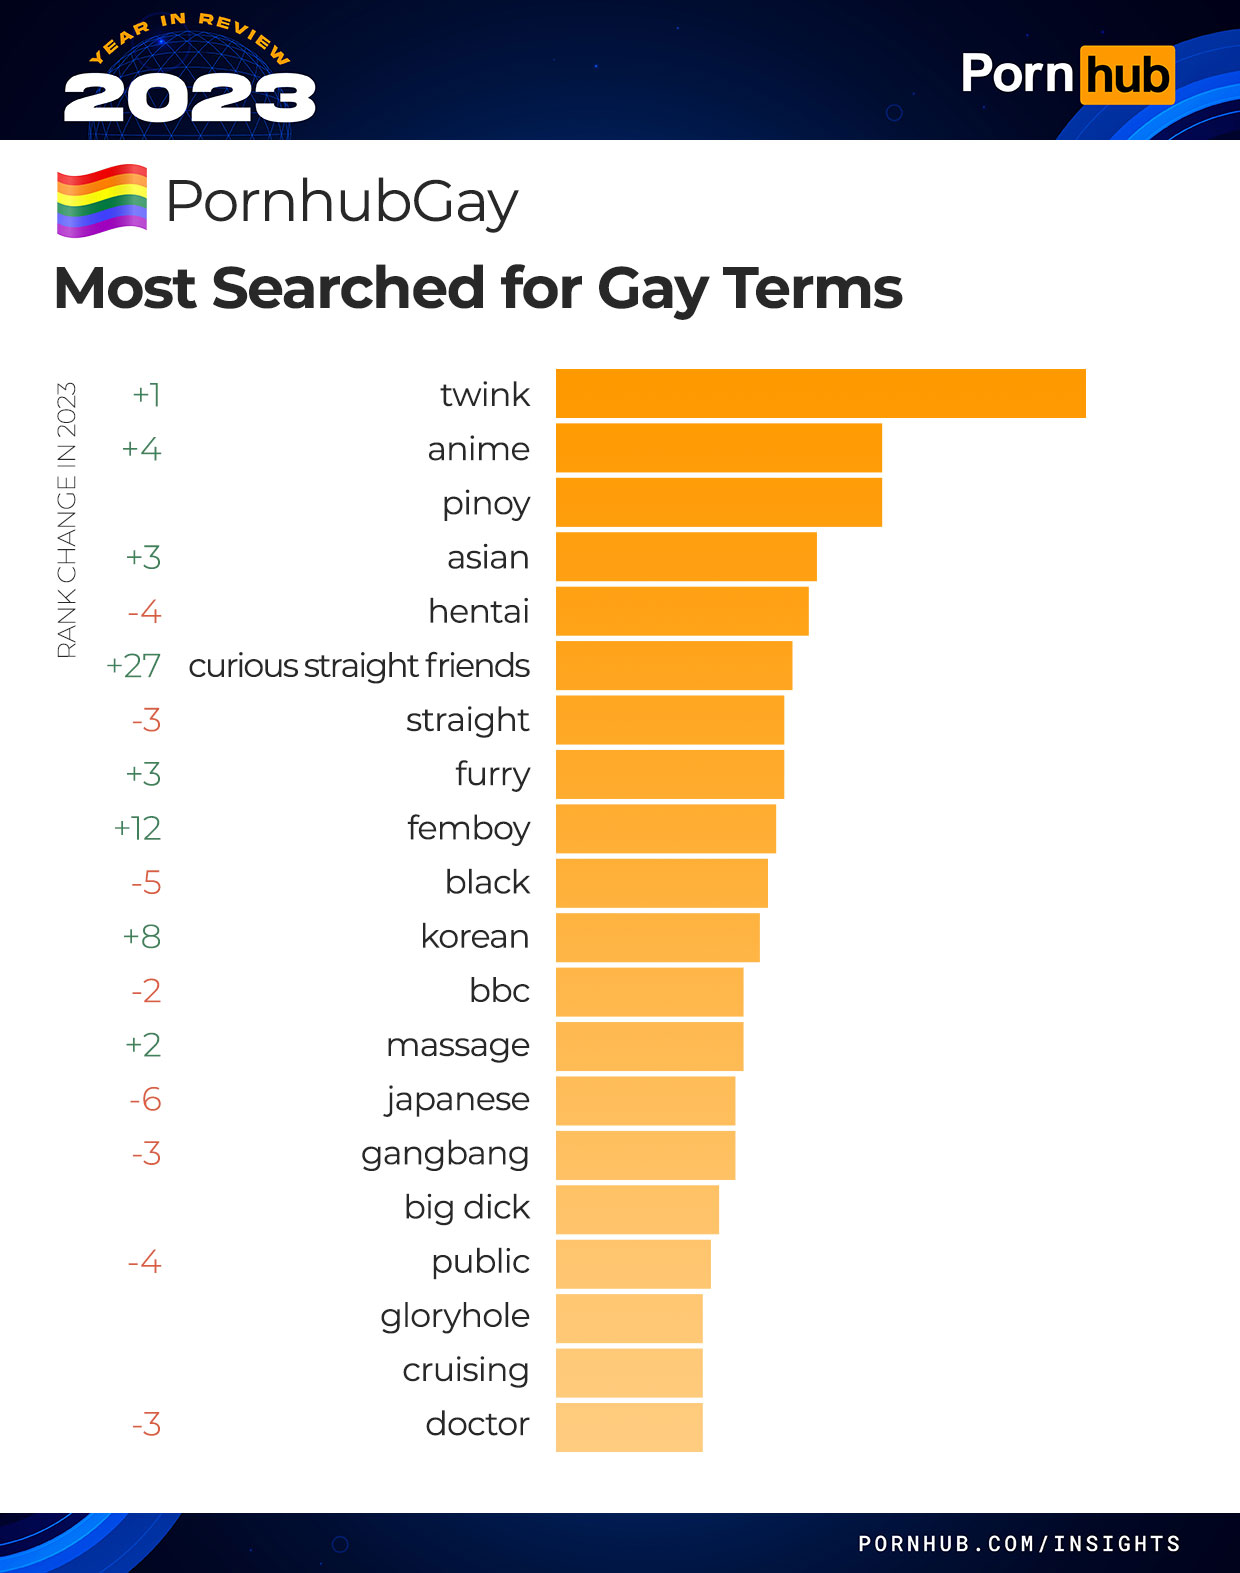 PornHub reveals what people searched for most in 2023